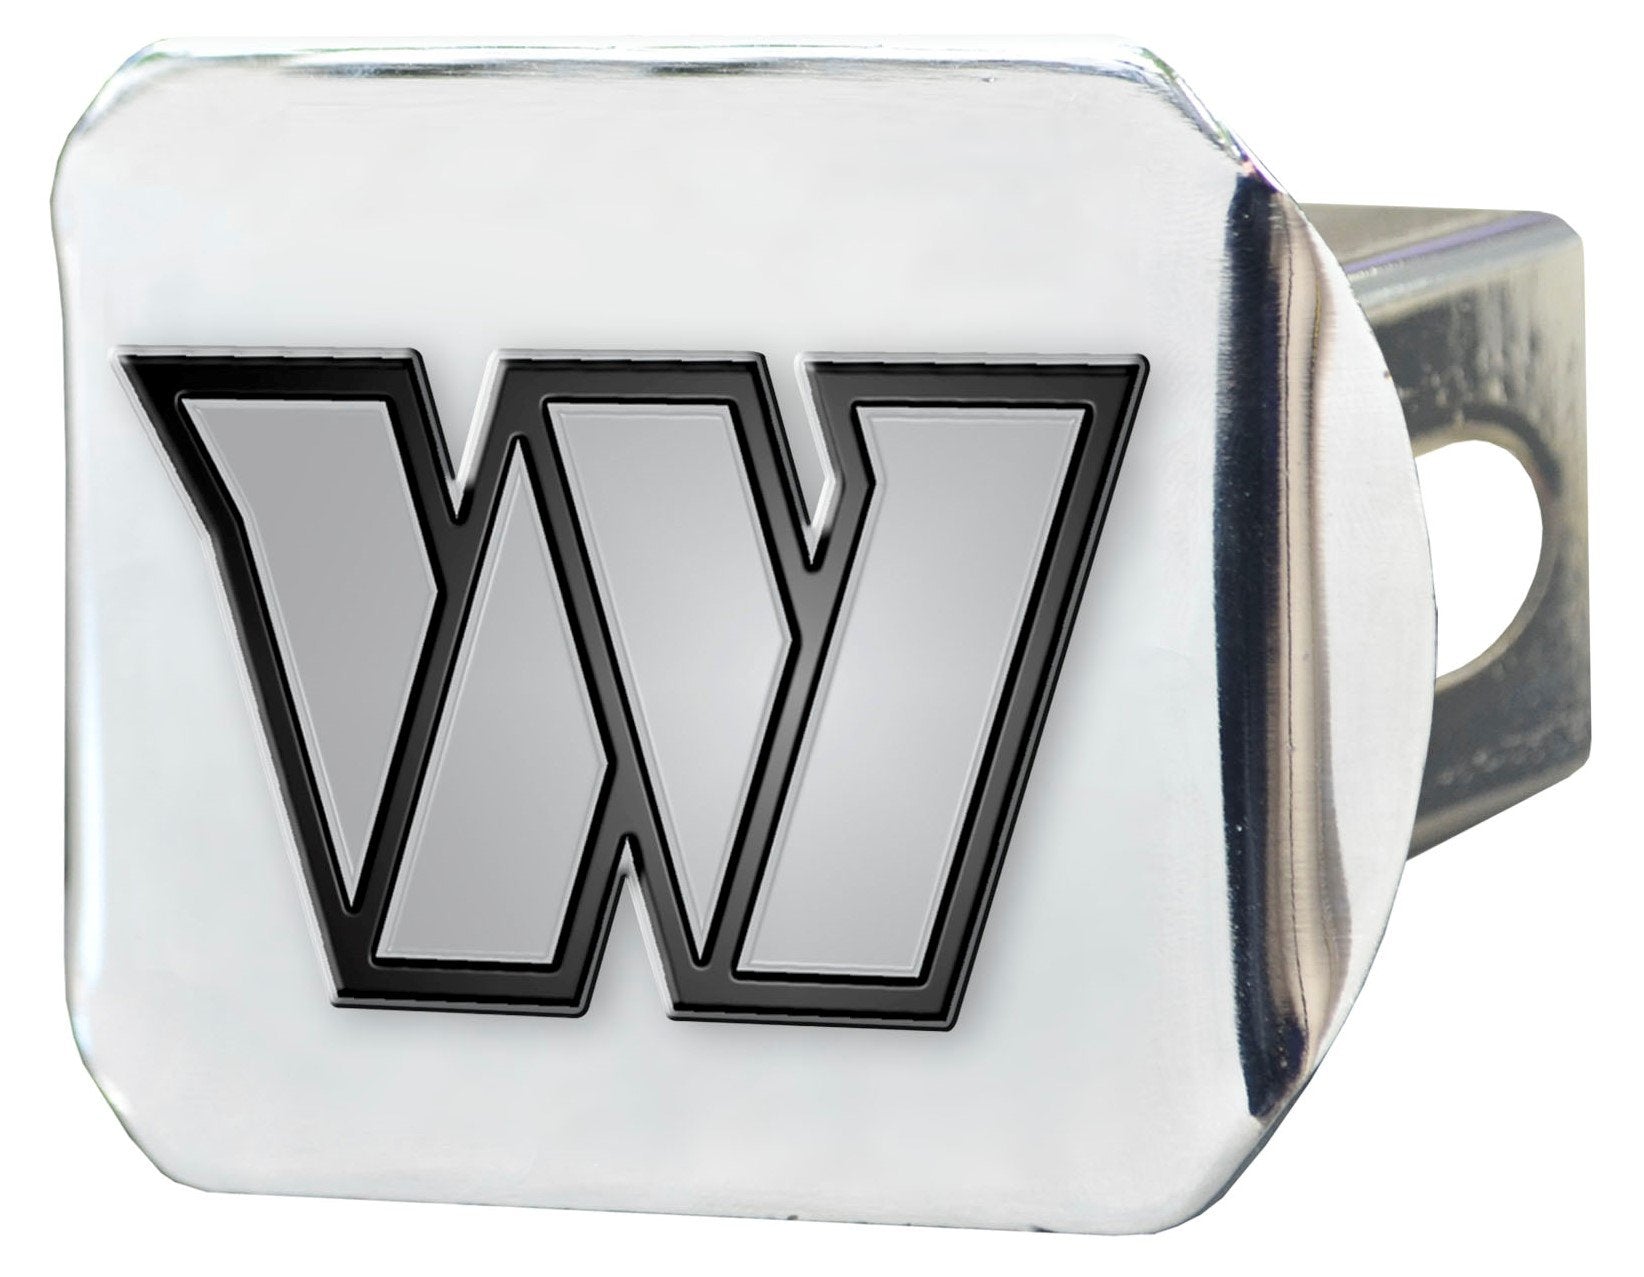 Washington Commanders Solid Metal Hitch Cover with Chrome Metal Emblem 2 Inch Square Type III